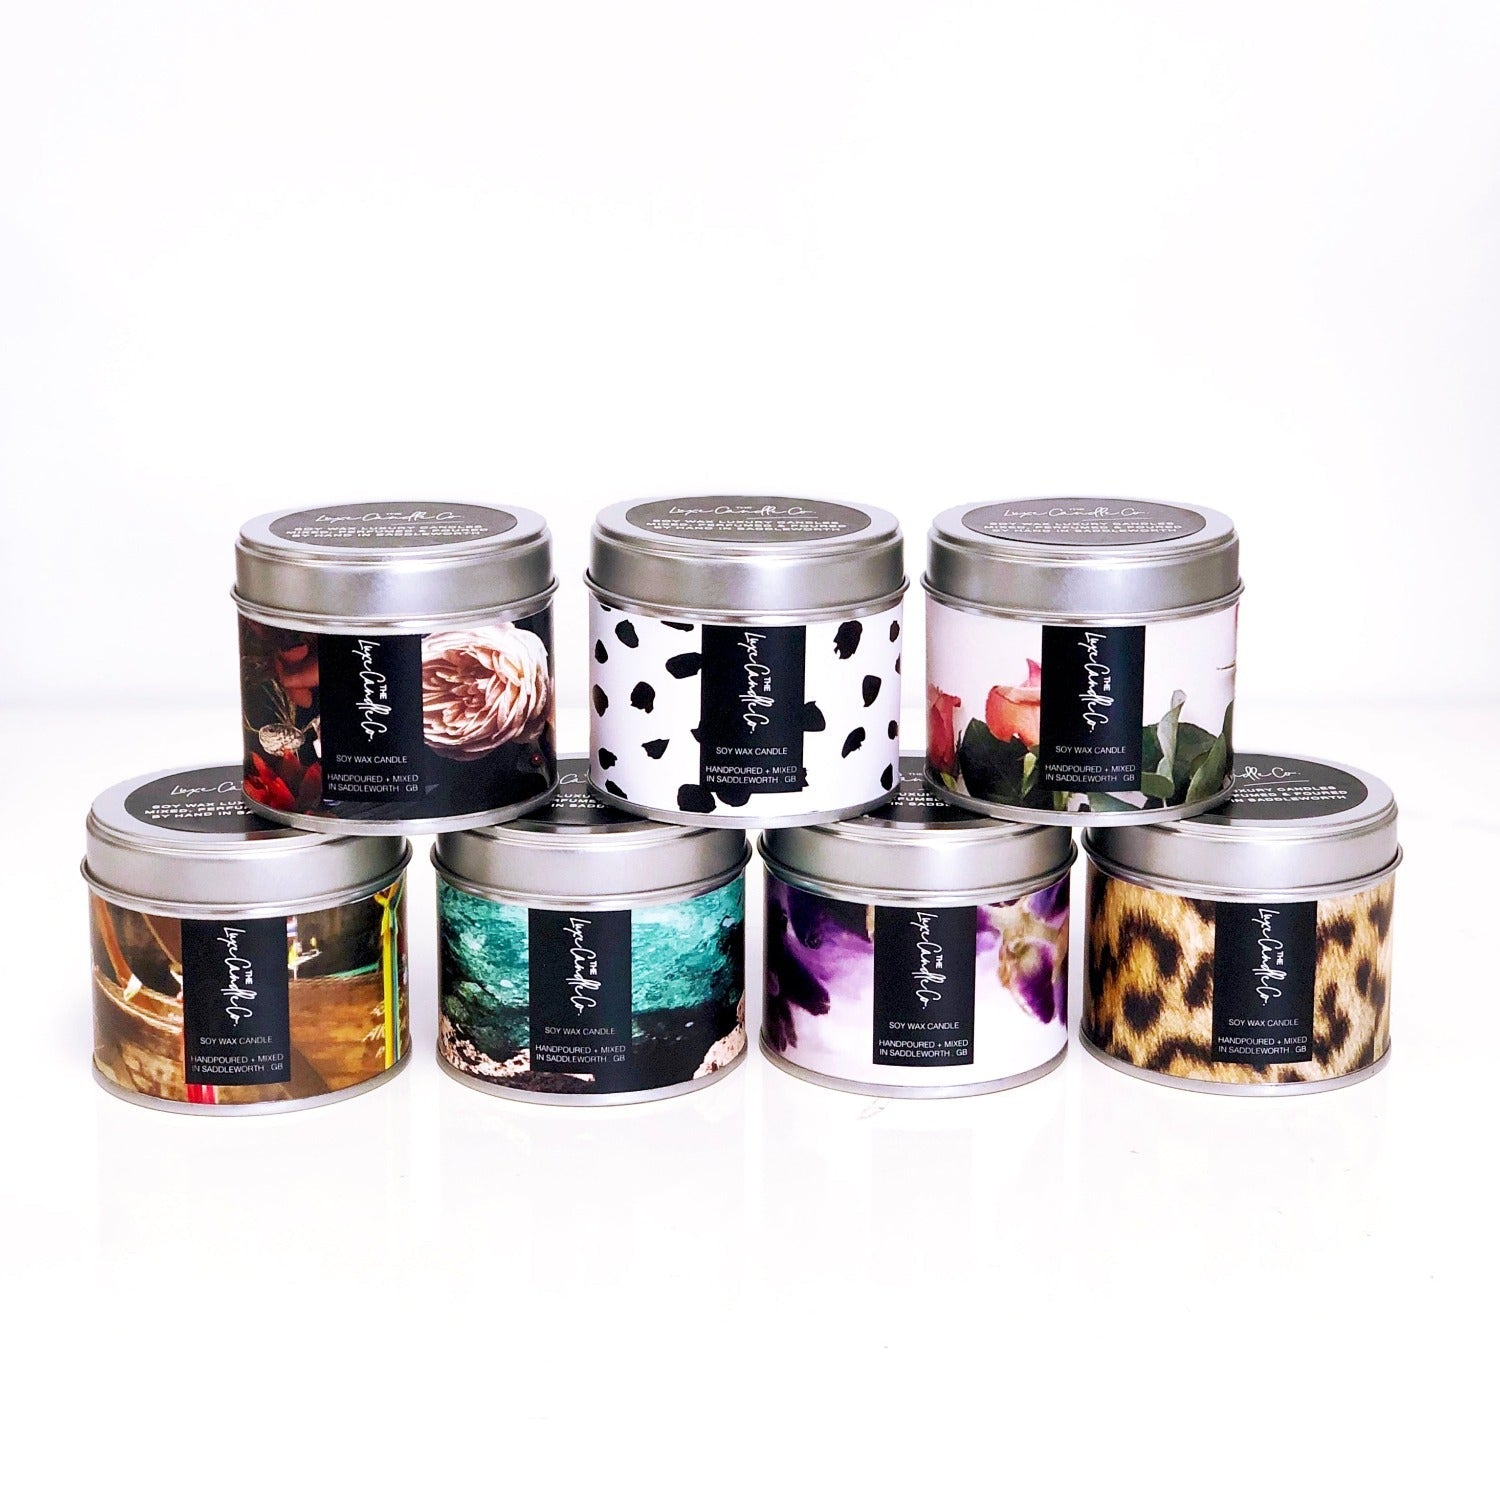 Wonderful prints | Luxury gifts | Scented candles